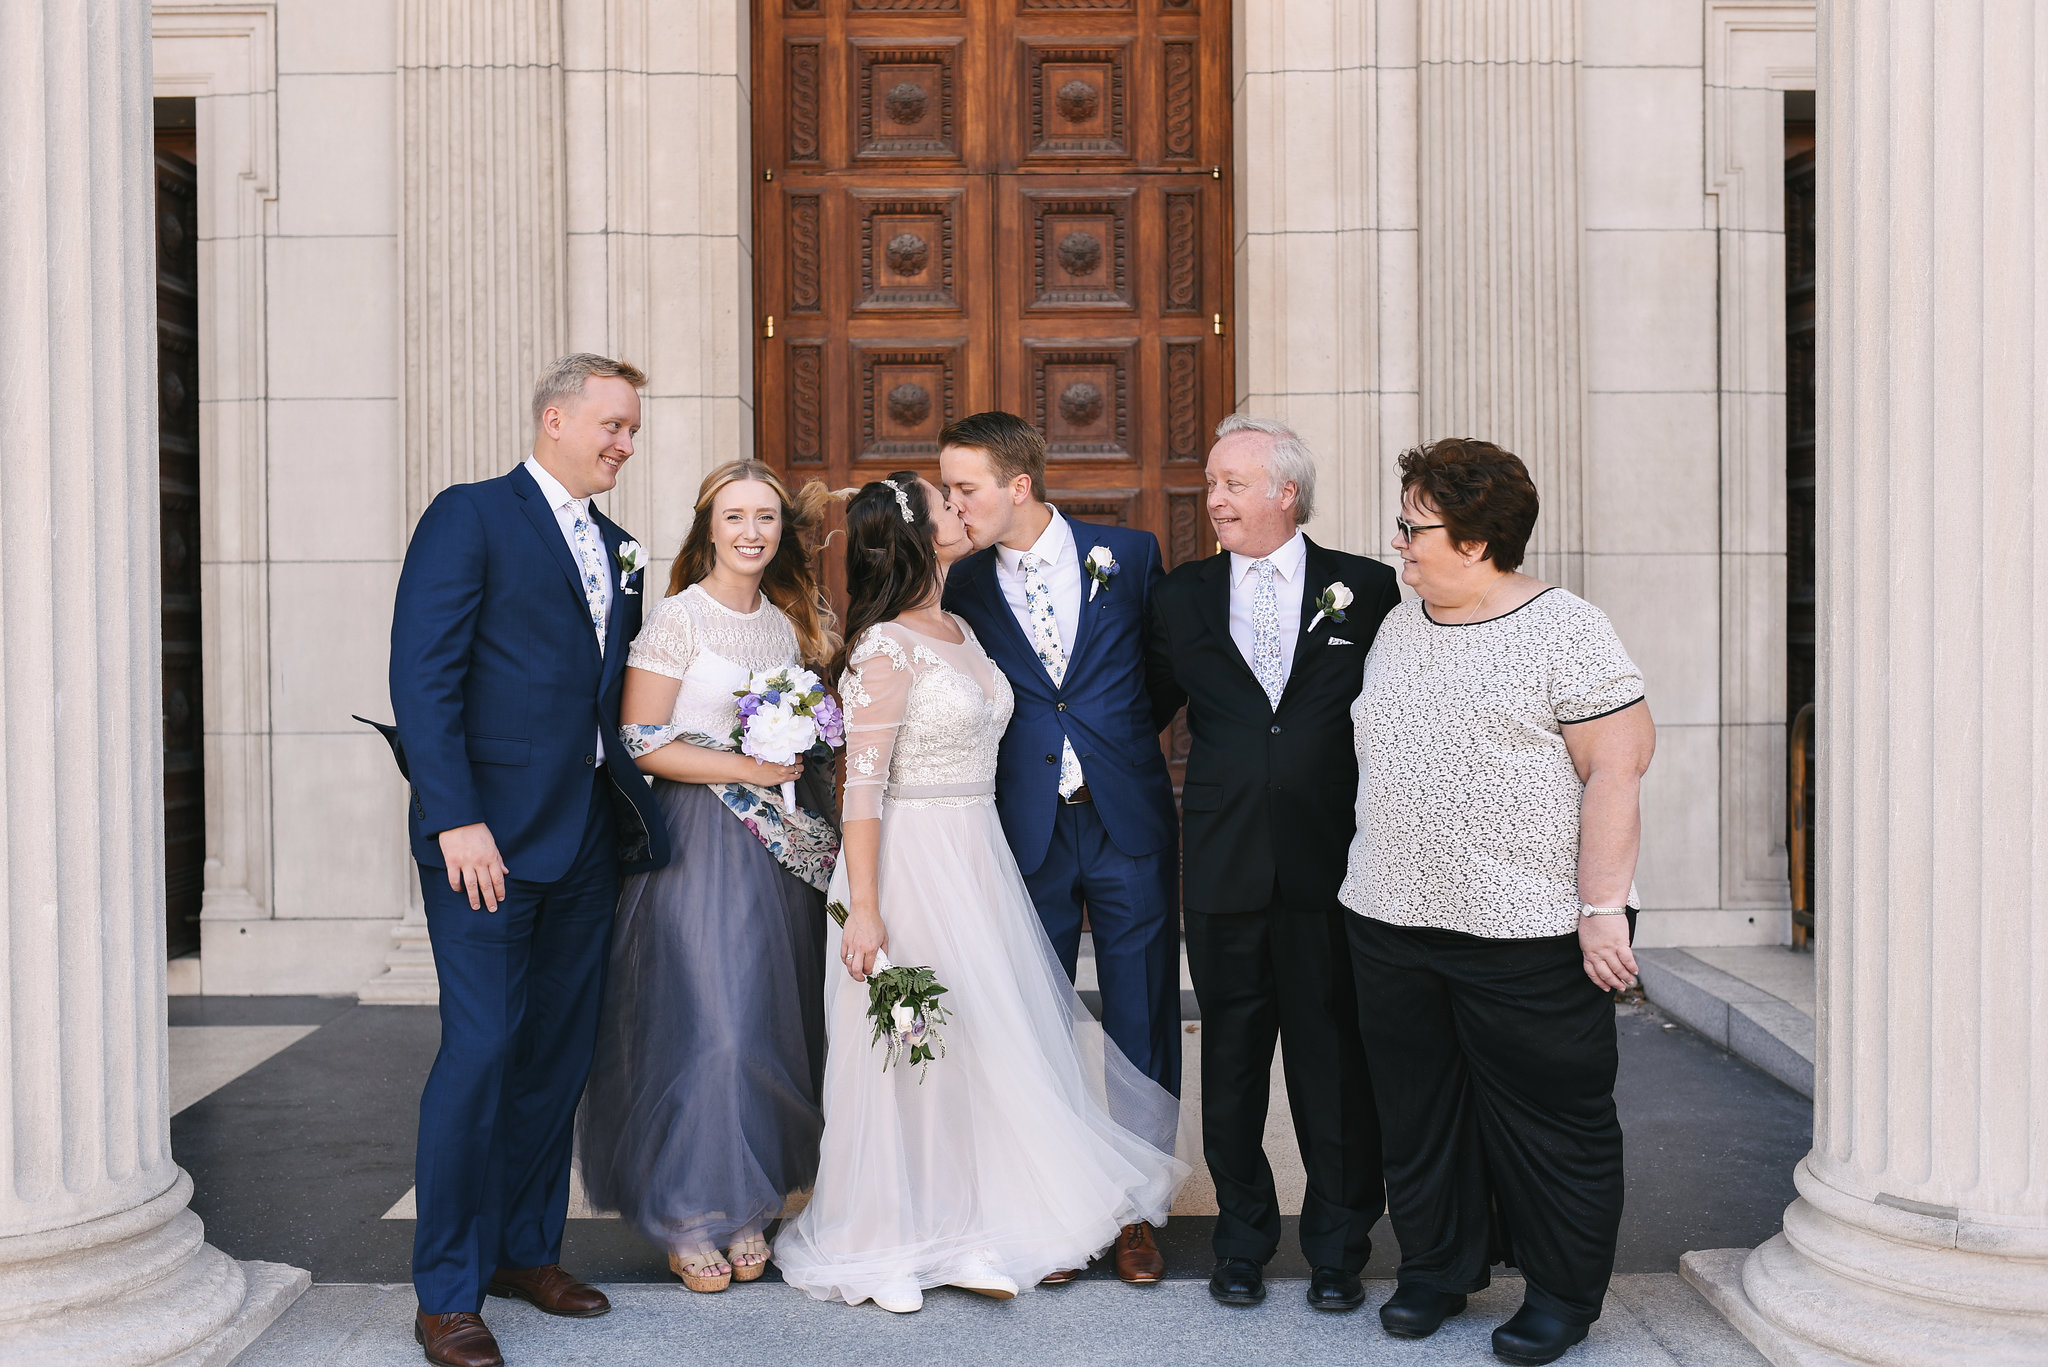  Baltimore, Canton, Church Wedding, Modern, Outdoors, Maryland Wedding Photographer, Romantic, Classic, St. Casimir Church, Portrait of bride and groom with family, bride and groom kissing 